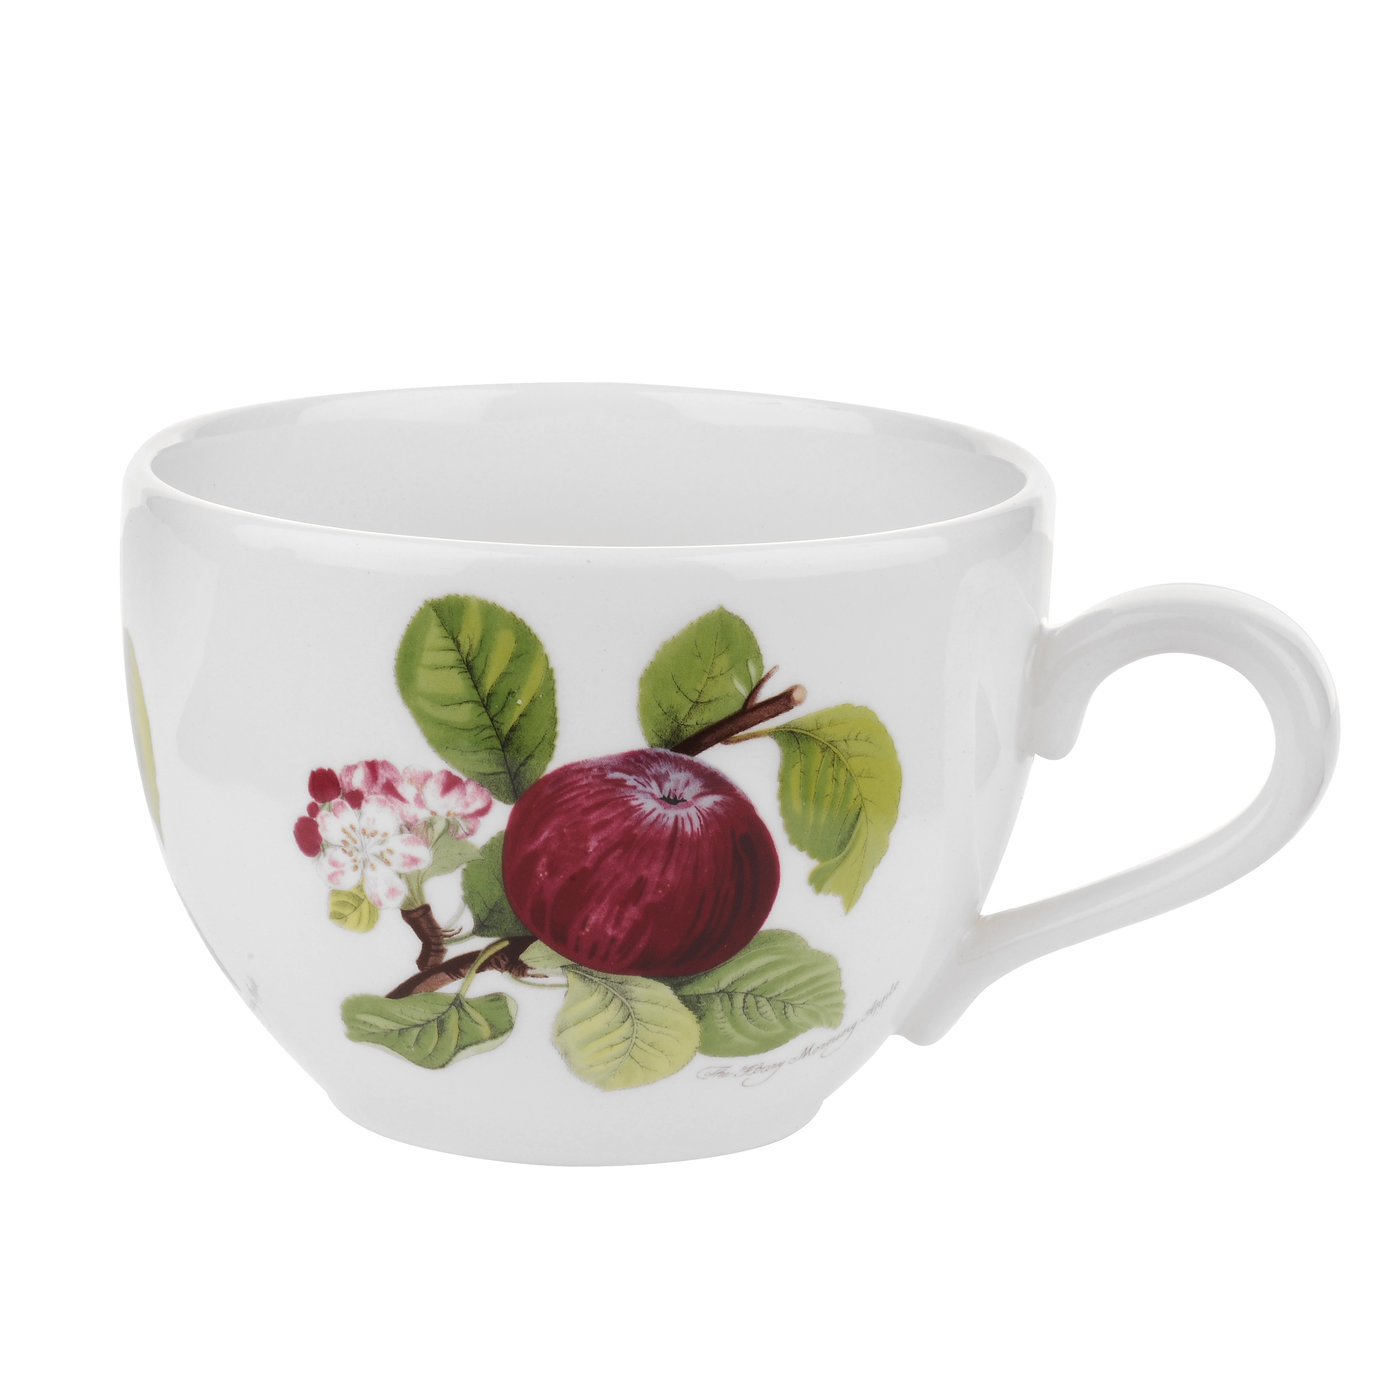 SPARE PART Apple Jumbo Cup ONLY 